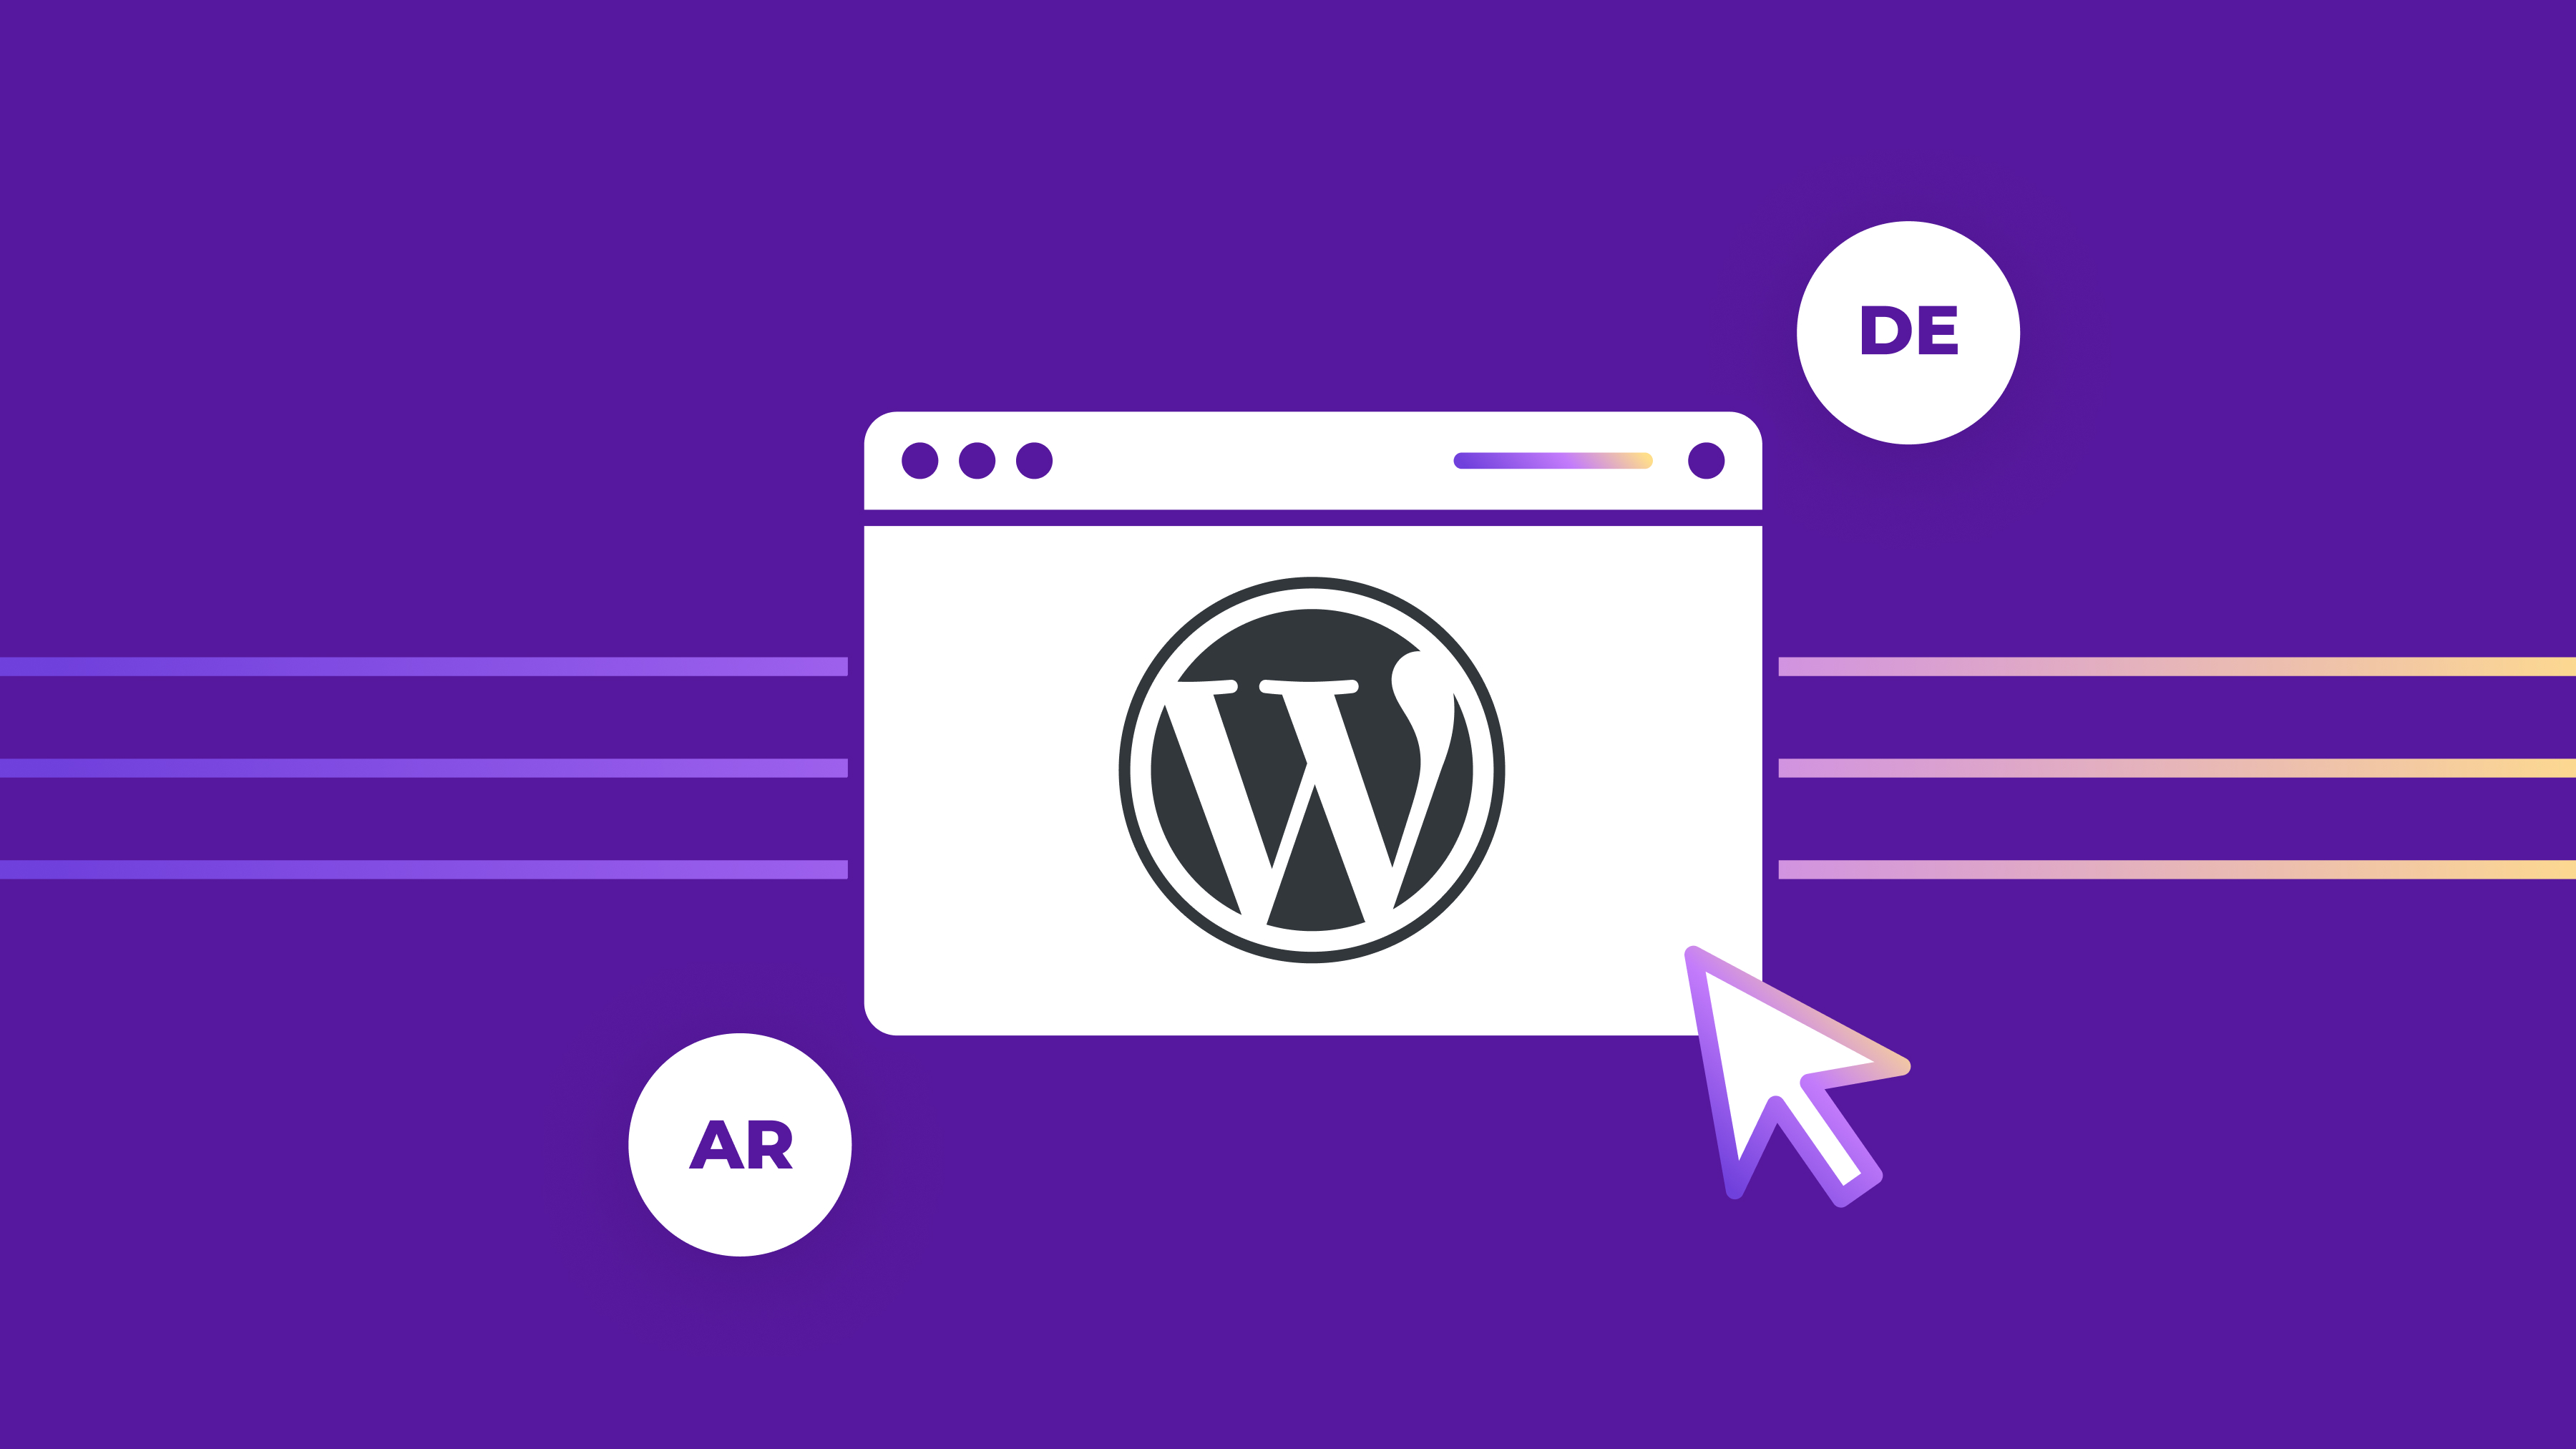 Get a comparison of 7 WordPress translation plugins meant to streamline your translation workflows. Plus, get tips on choosing and installing the right one.  